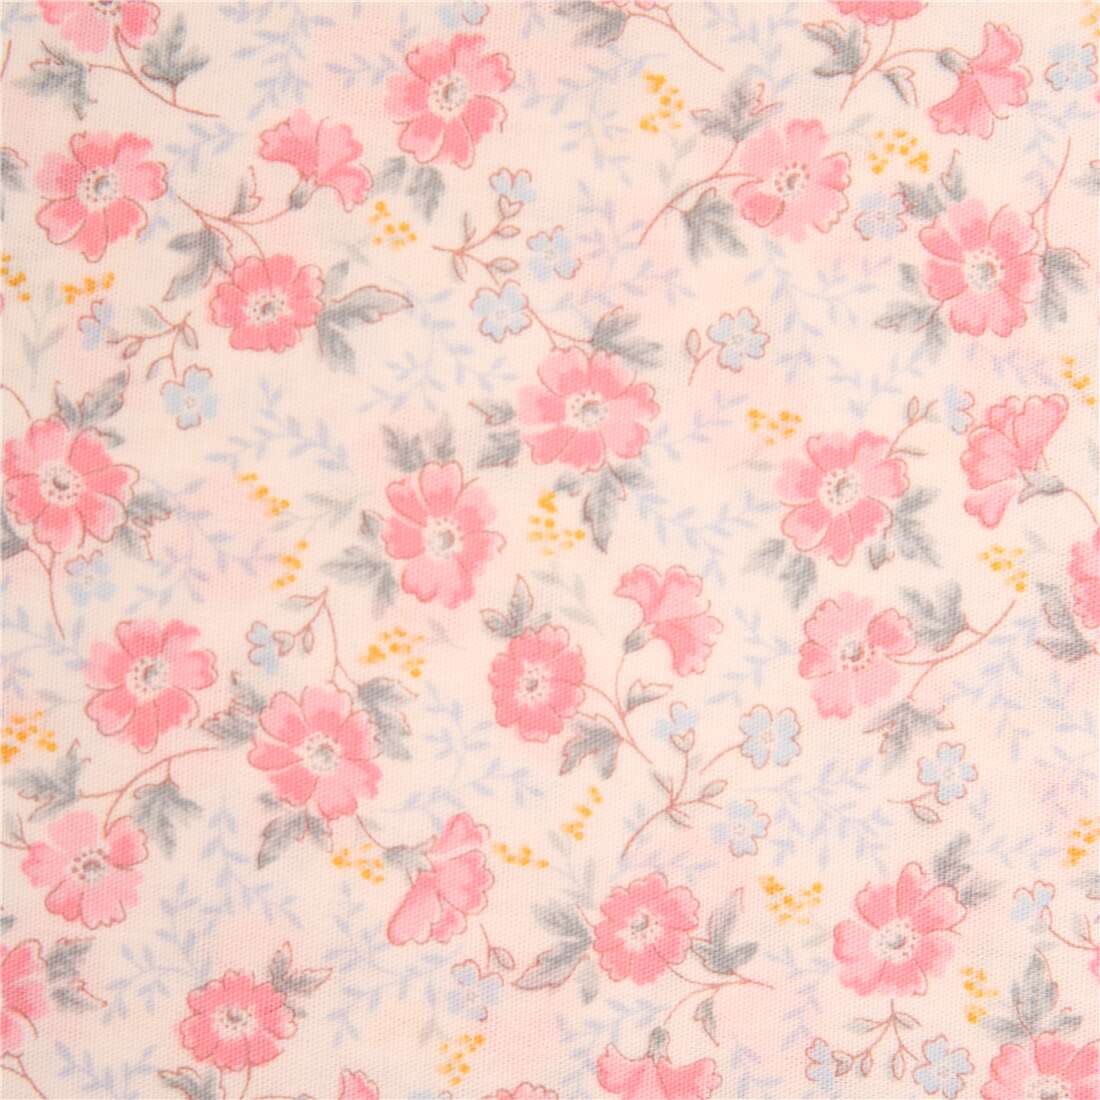 https://kawaii.kawaii.at/images/product_images/big_images/off-white-light-pink-all-over-floral-Japanese-cotton-poplin-fabric-244515-1.jpg